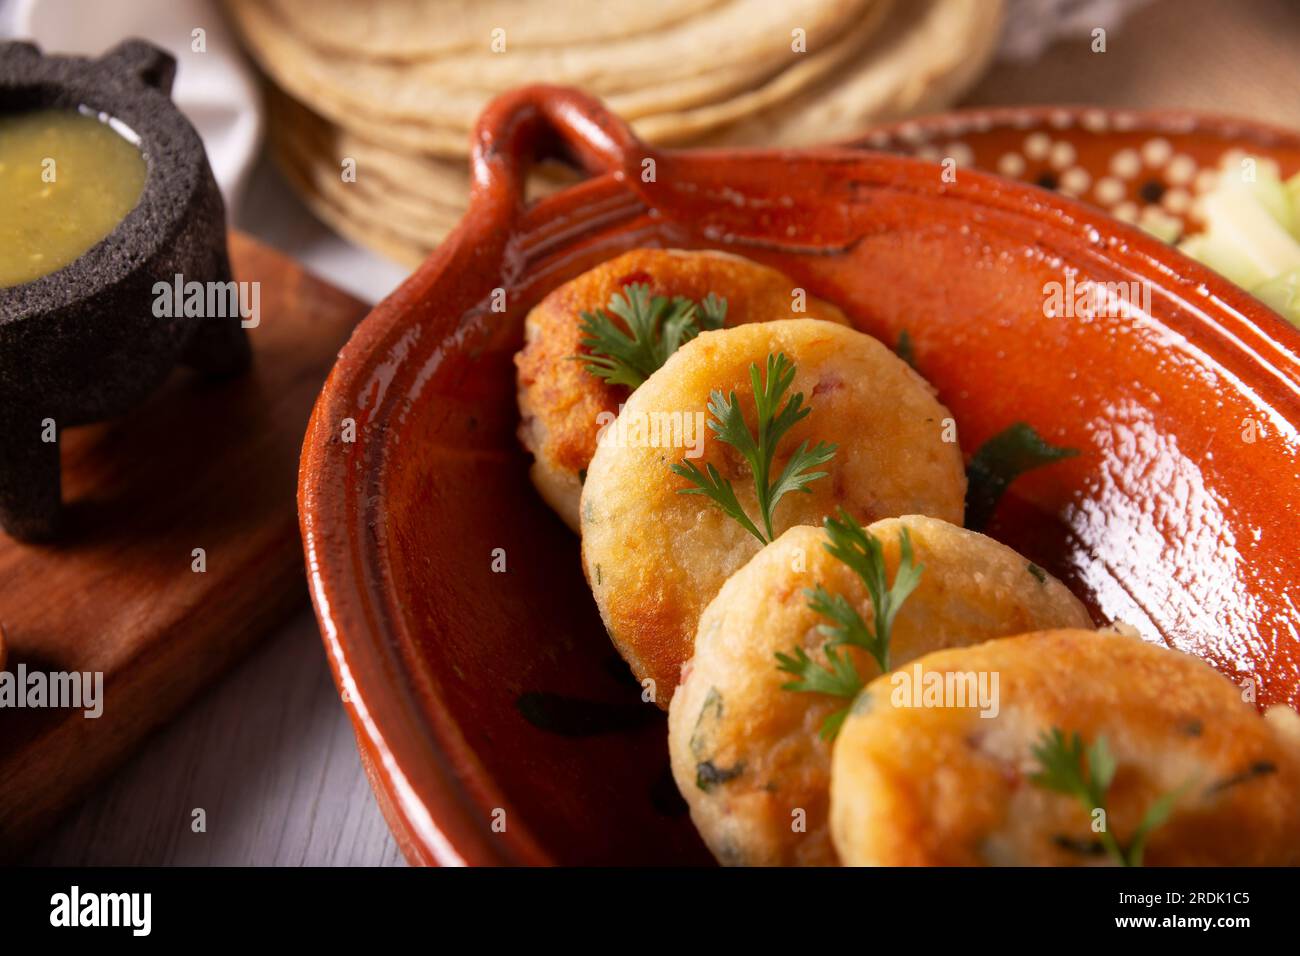 Potato pancakes, a very popular homemade dish in many countries, in traditional Mexican cuisine they are known as 'Tortitas de Papa', it is an easy, f Stock Photo